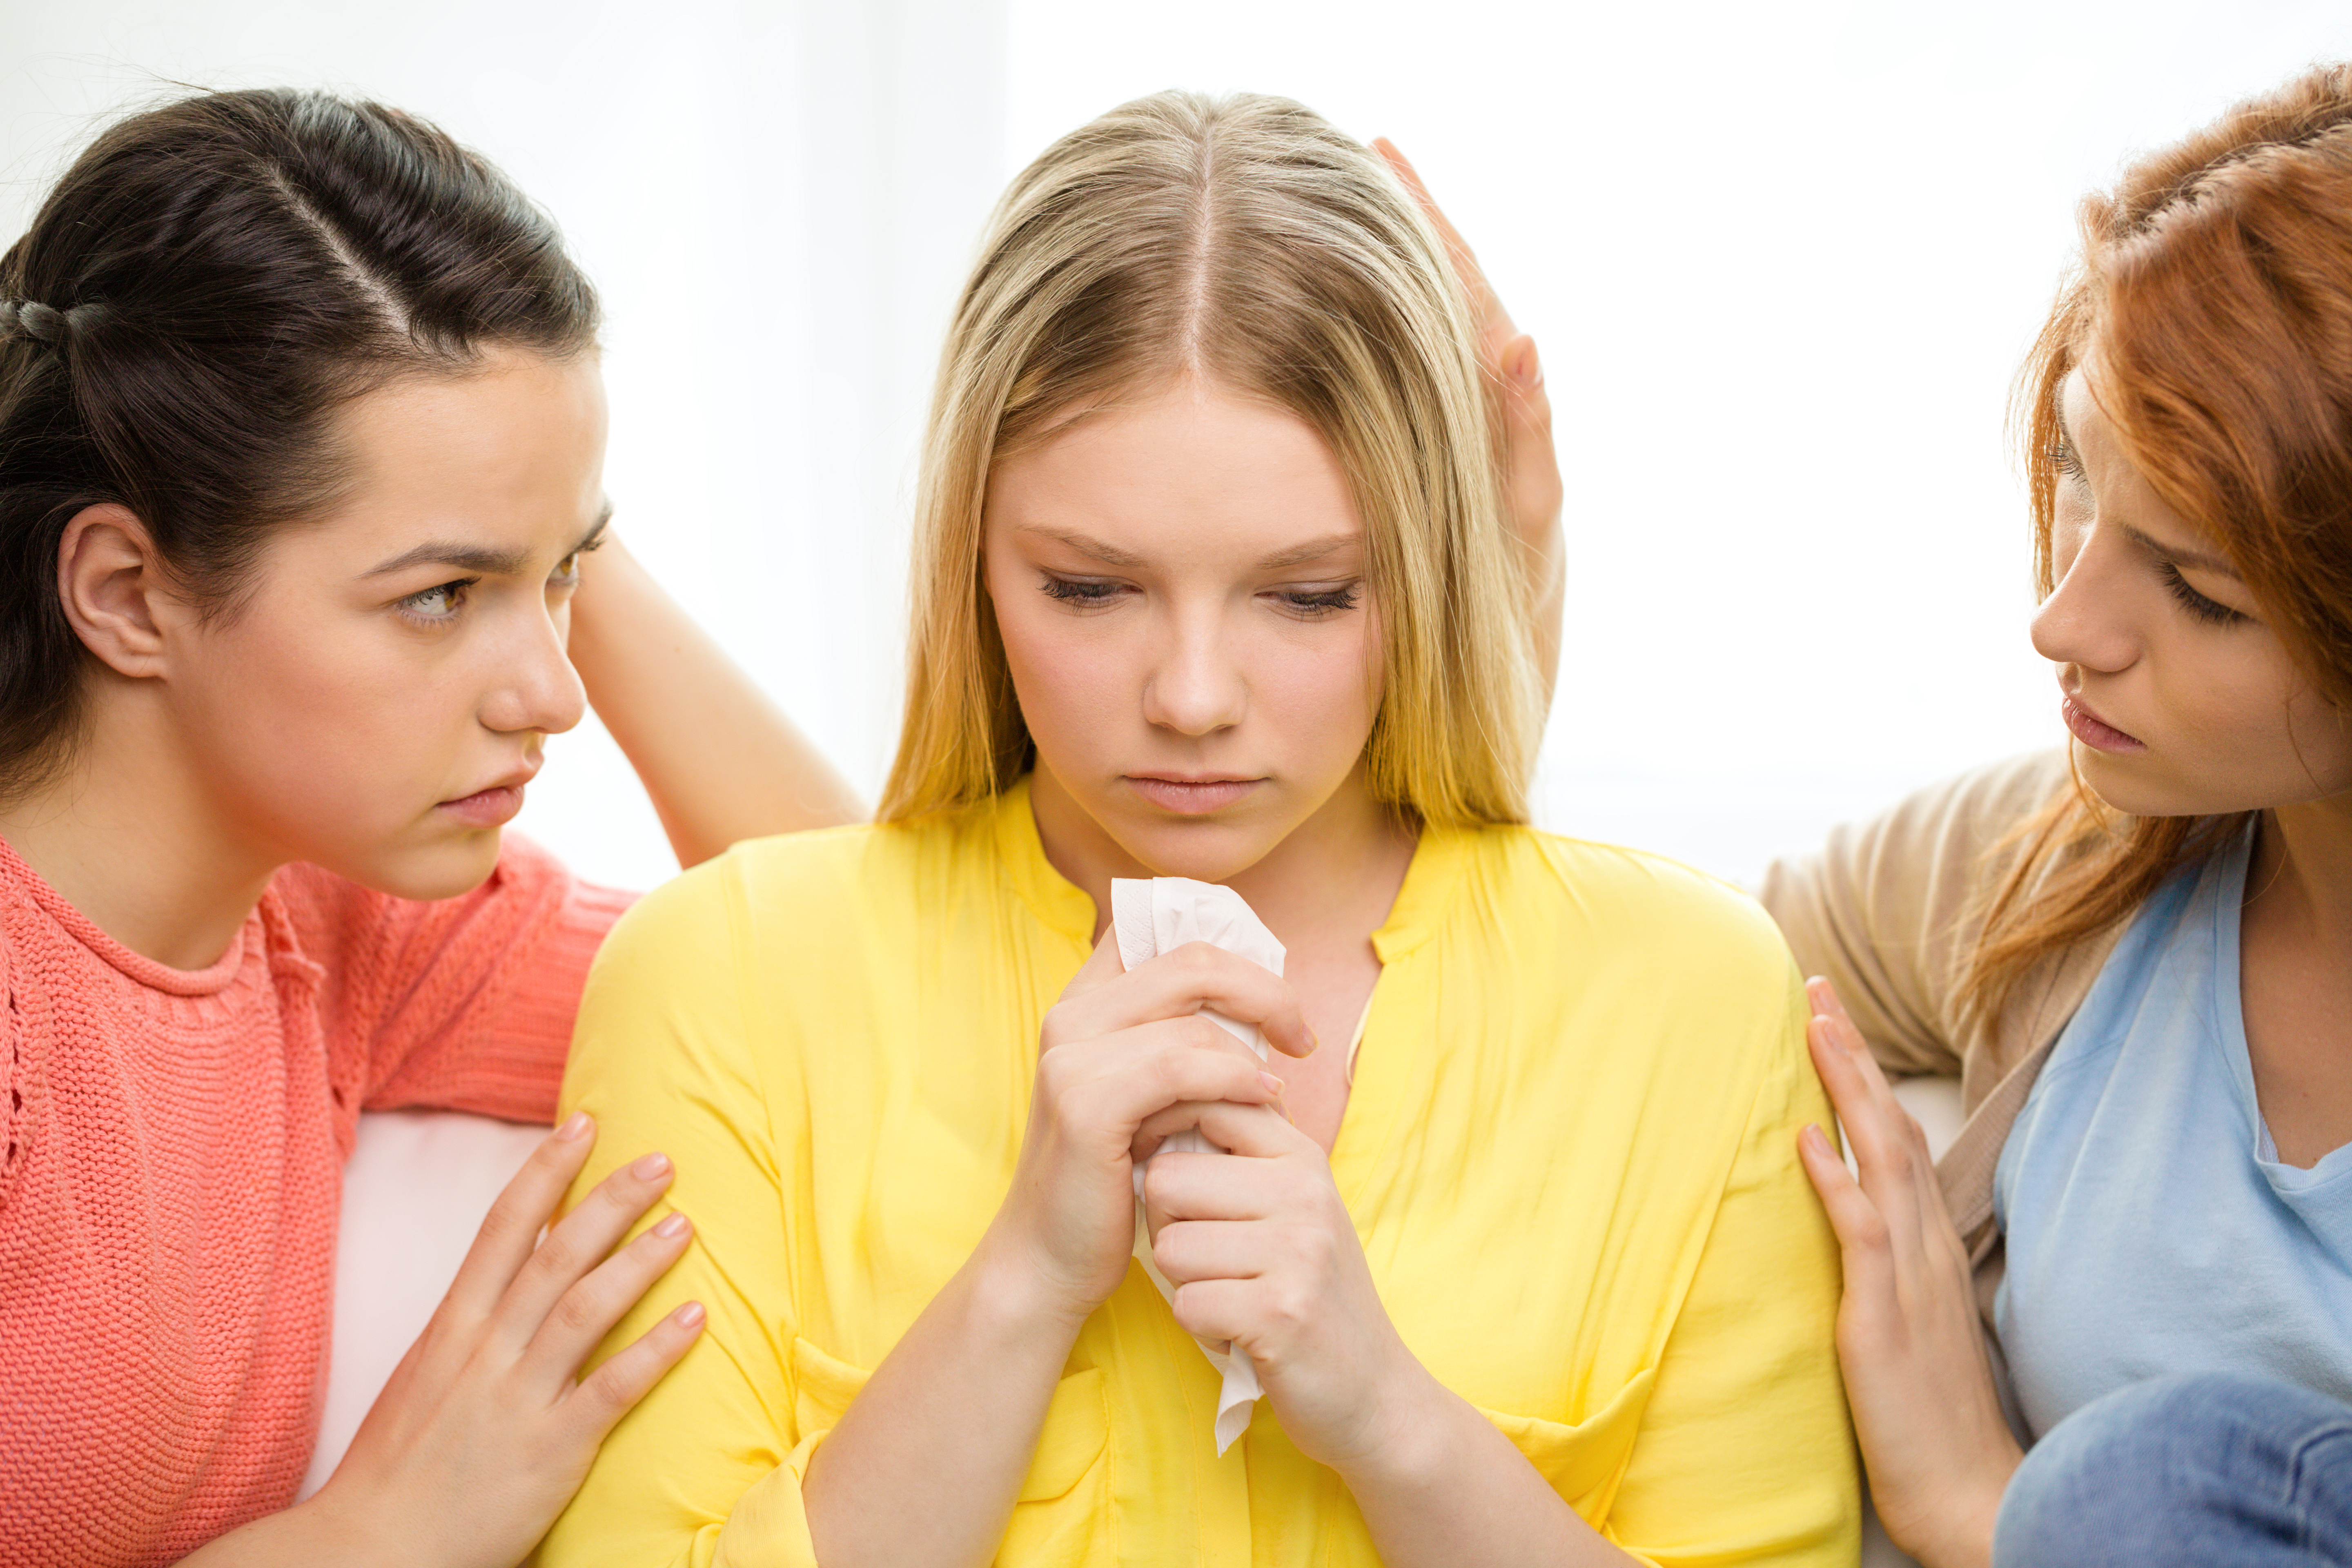 Two girls comforting a girl sitting between them | Source: Shutterstock